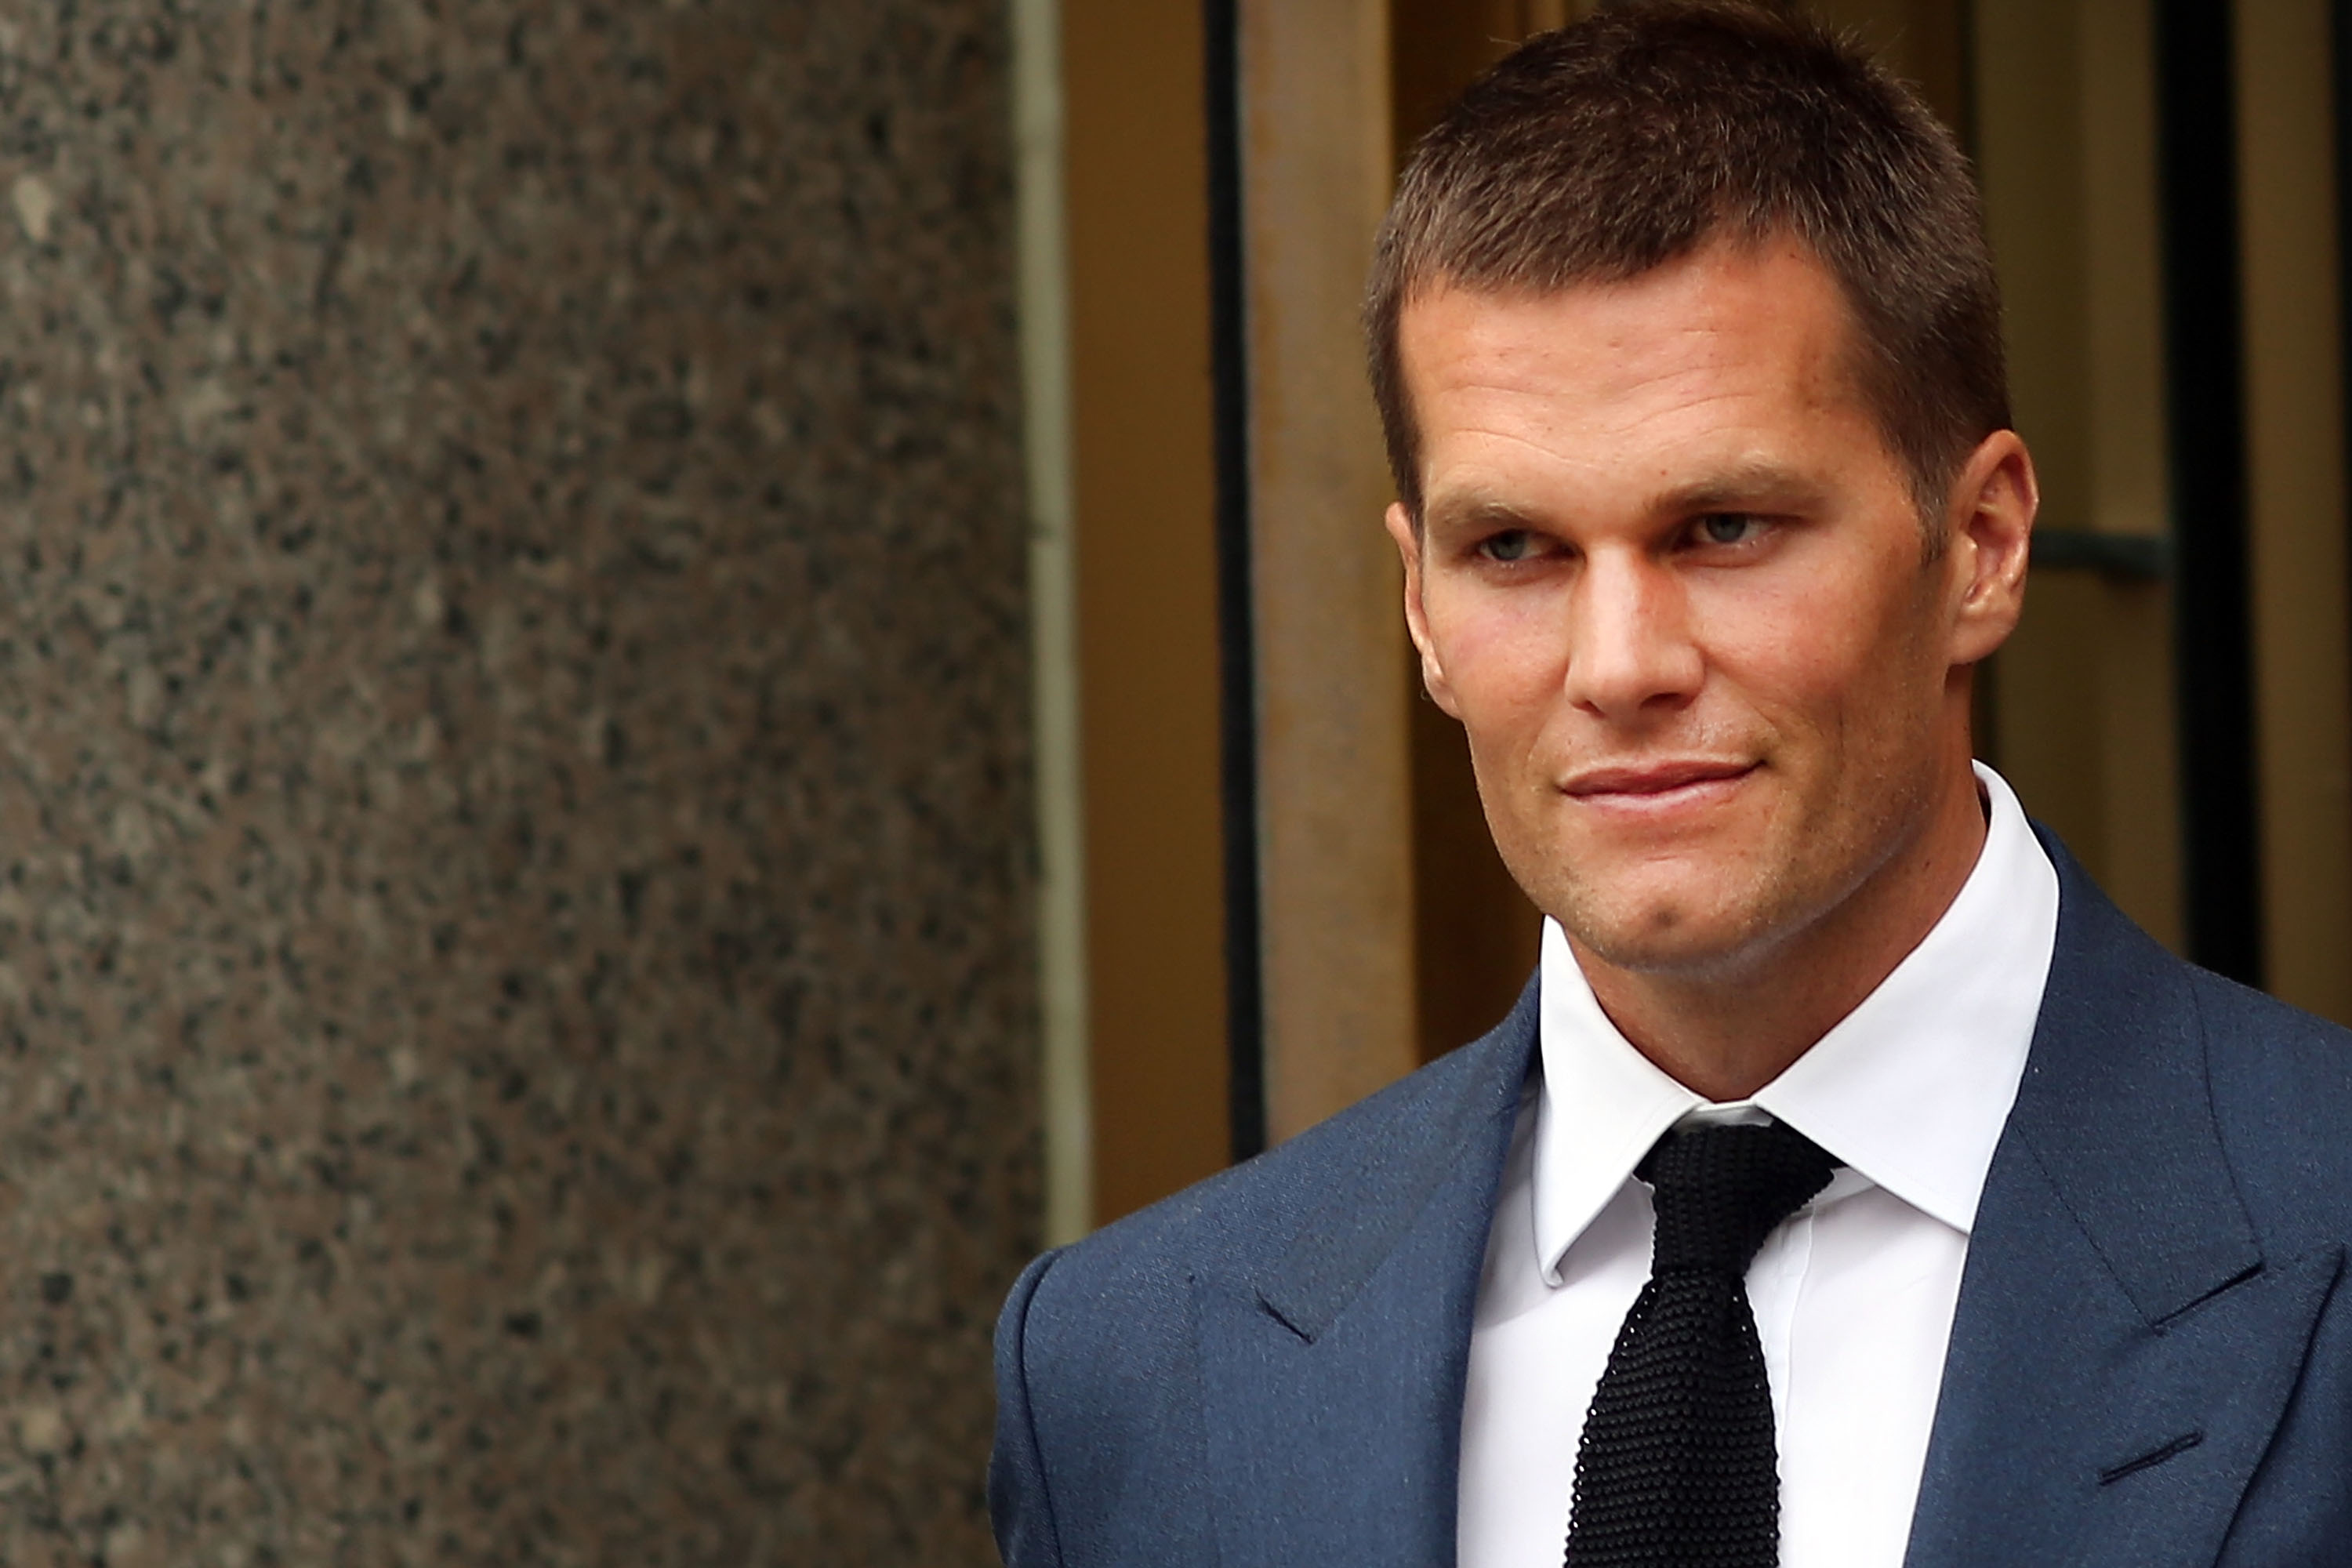 Tom Brady And Roger Goodell Fail To Reach Settlement Over 4-Game Suspension